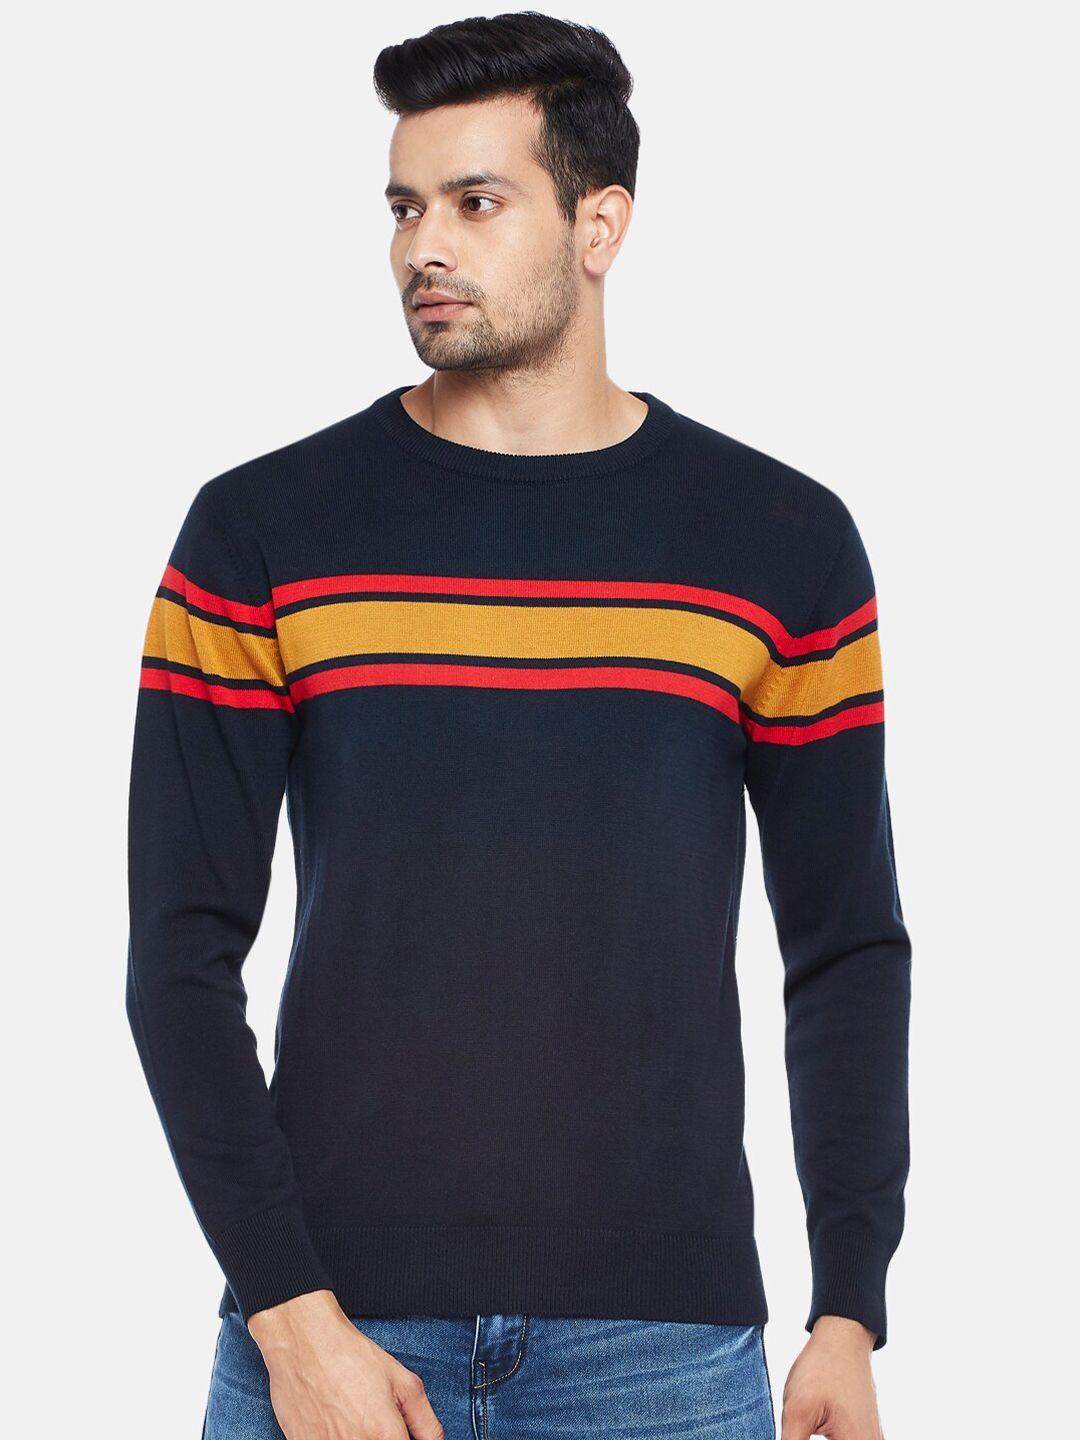 byford by pantaloons men navy blue & red striped pullover